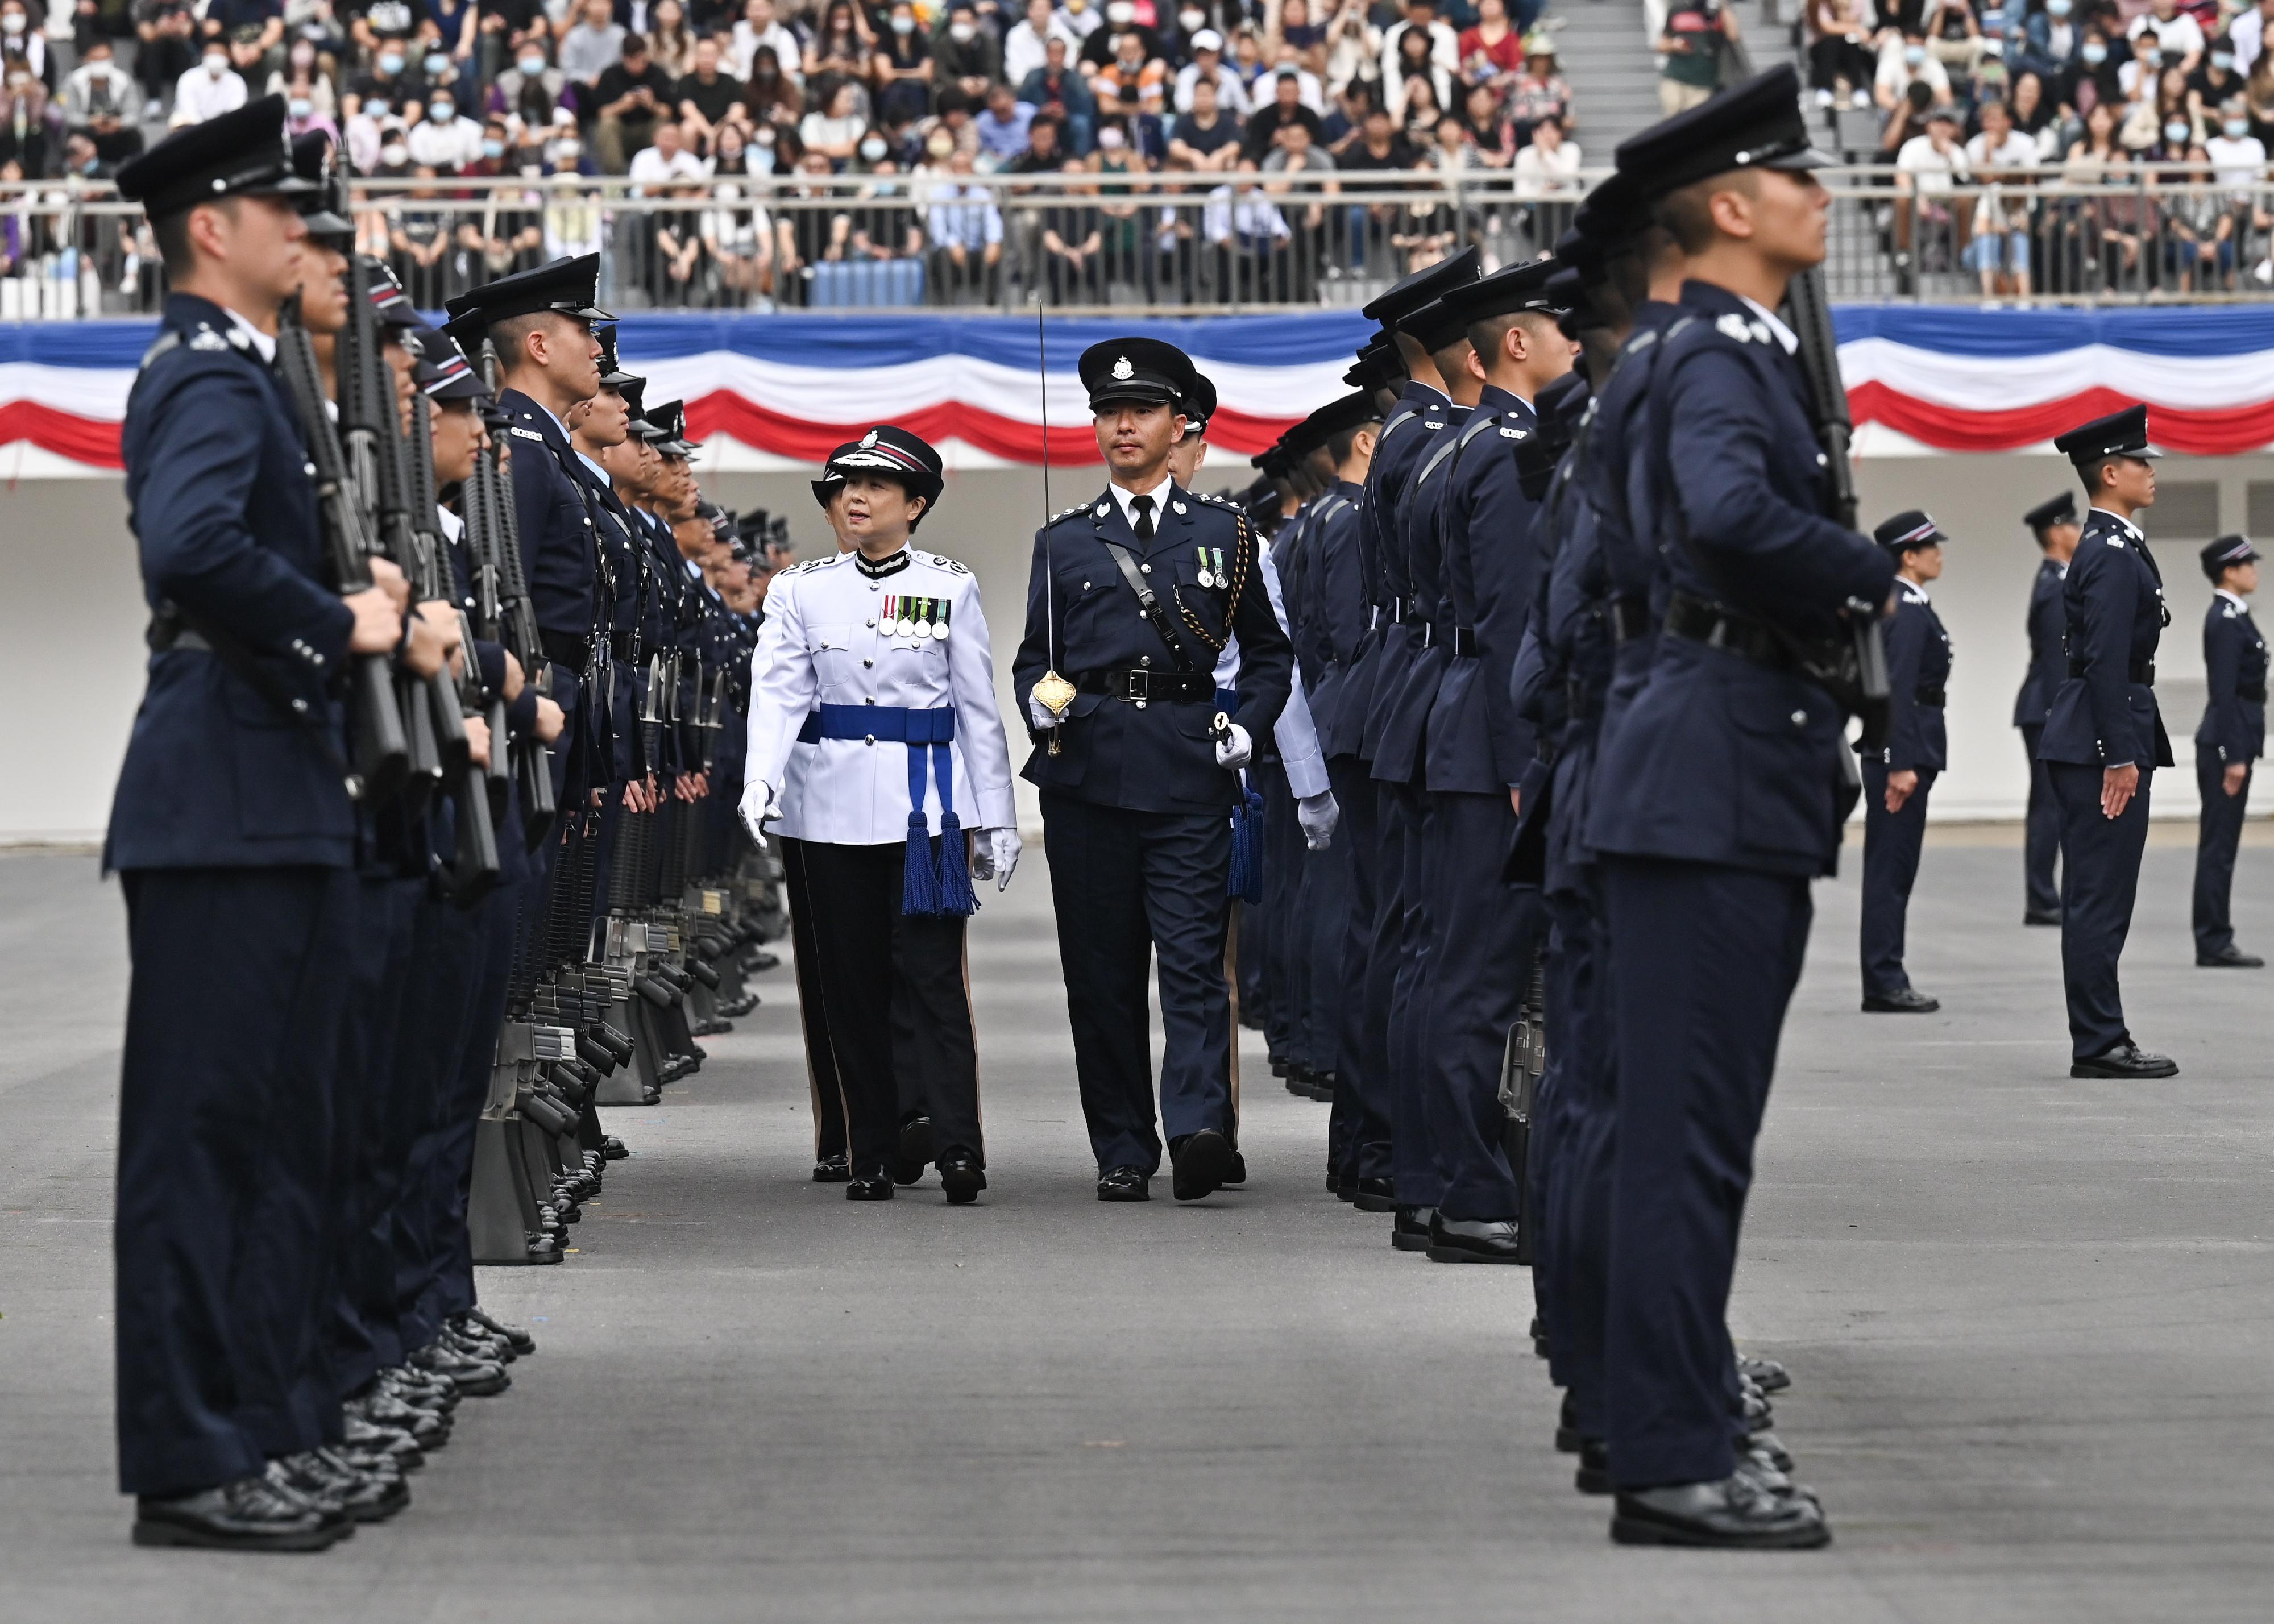 The Deputy Commissioner (National Security), Ms Lau Chi-wai, today (April 22) inspects a passing-out parade of 33 probationary inspectors and 123 recruit police constables at the Hong Kong Police College.